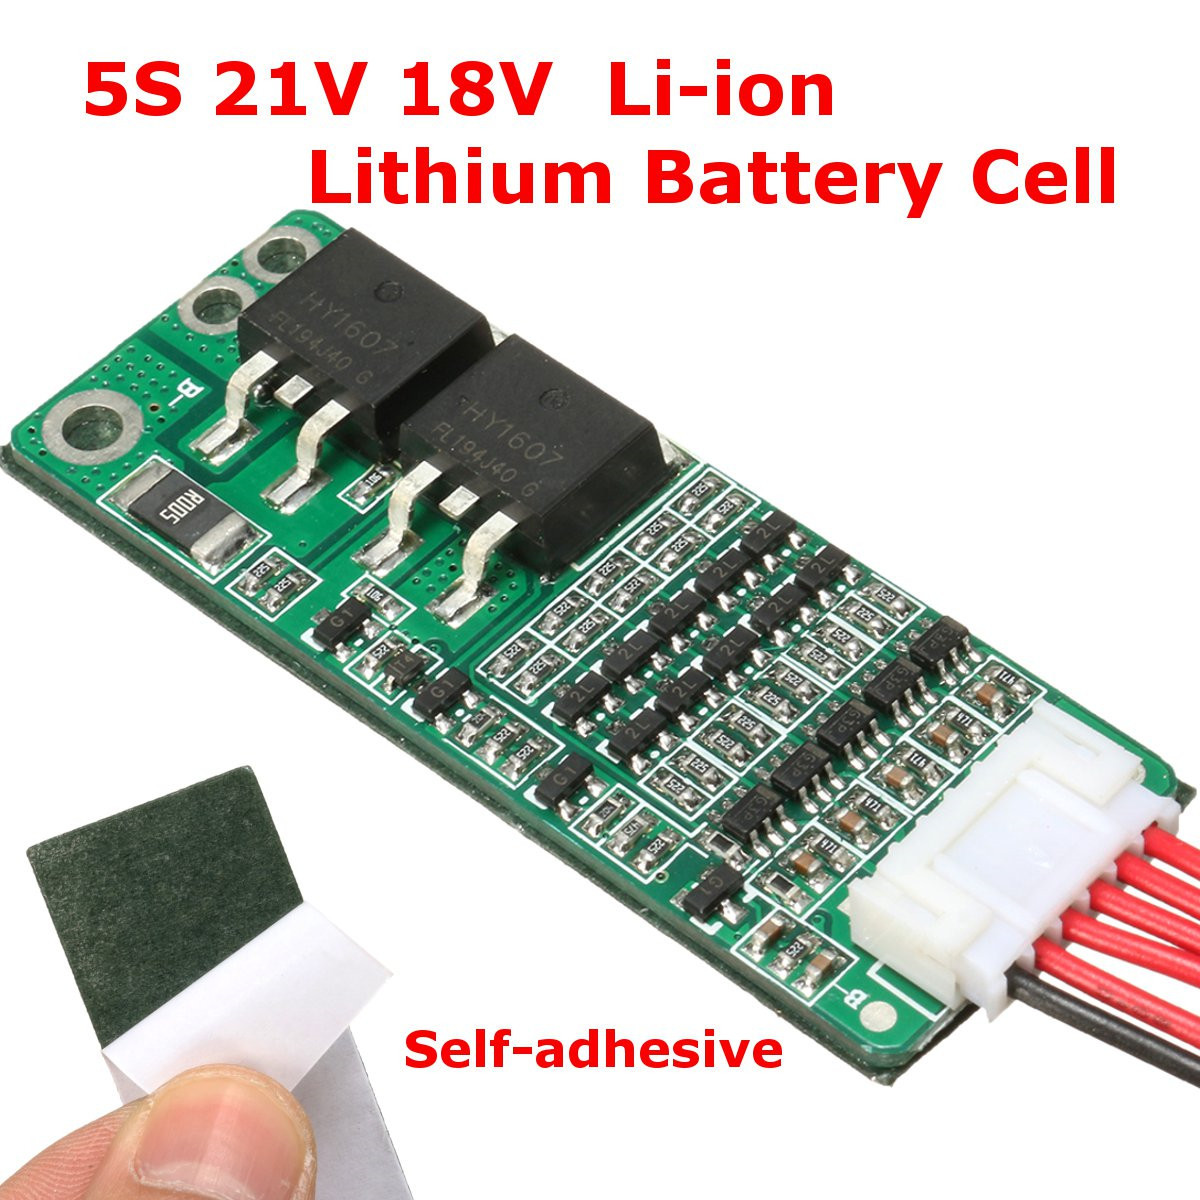 3pcs-5S-Lithium-Battery-21V-18V-Protection-Board-Li-ion-Lithium-Battery-Cell-1121552